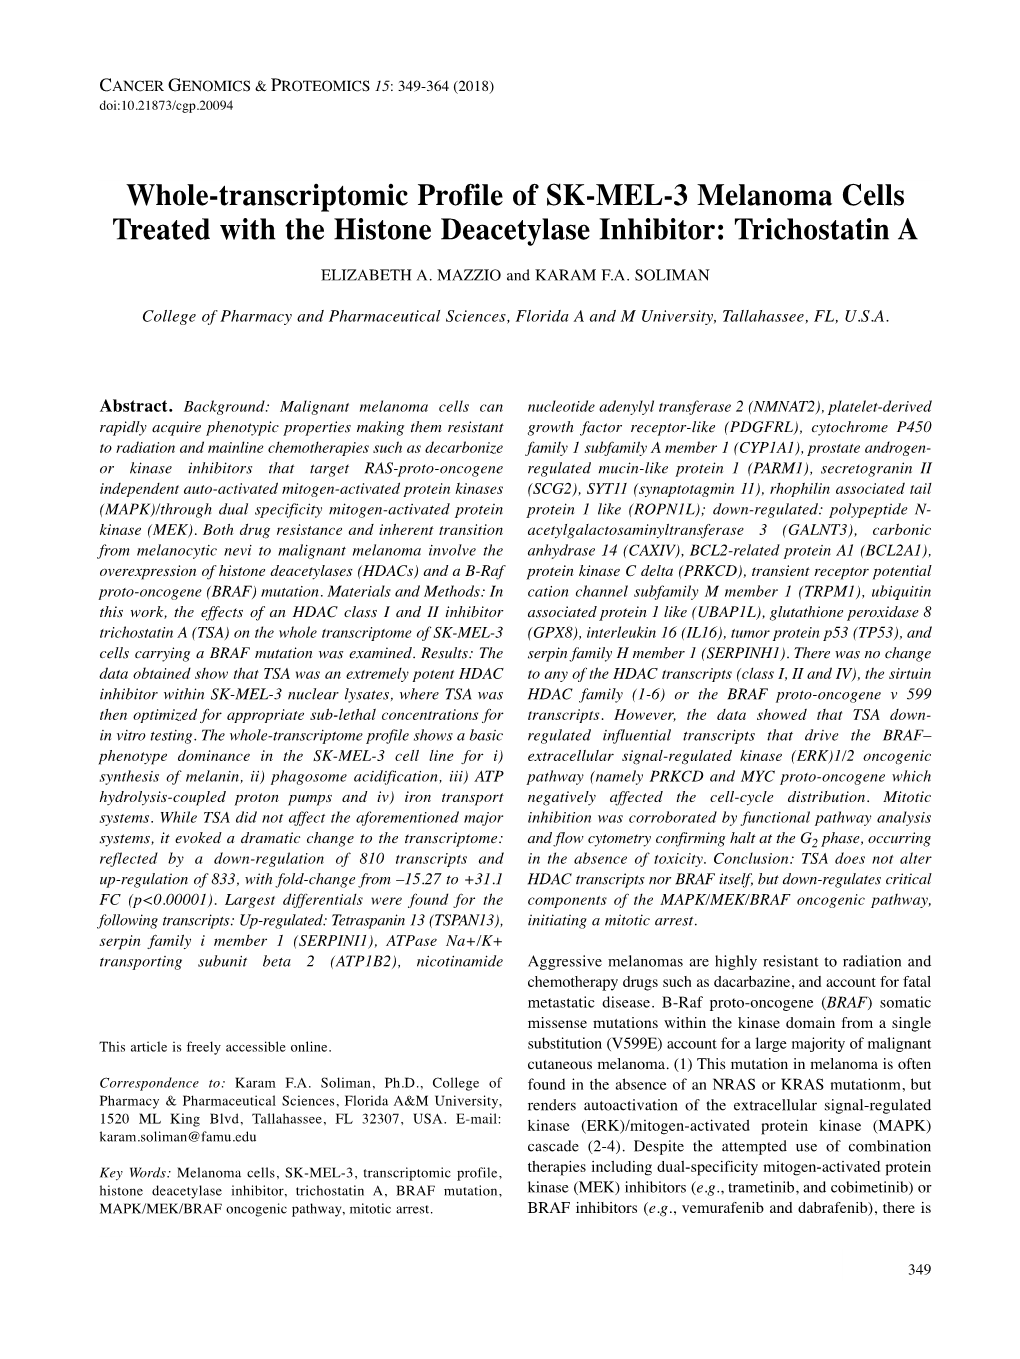 Whole-Transcriptomic Profile of SK-MEL-3 Melanoma Cells Treated with the Histone Deacetylase Inhibitor: Trichostatin a ELIZABETH A